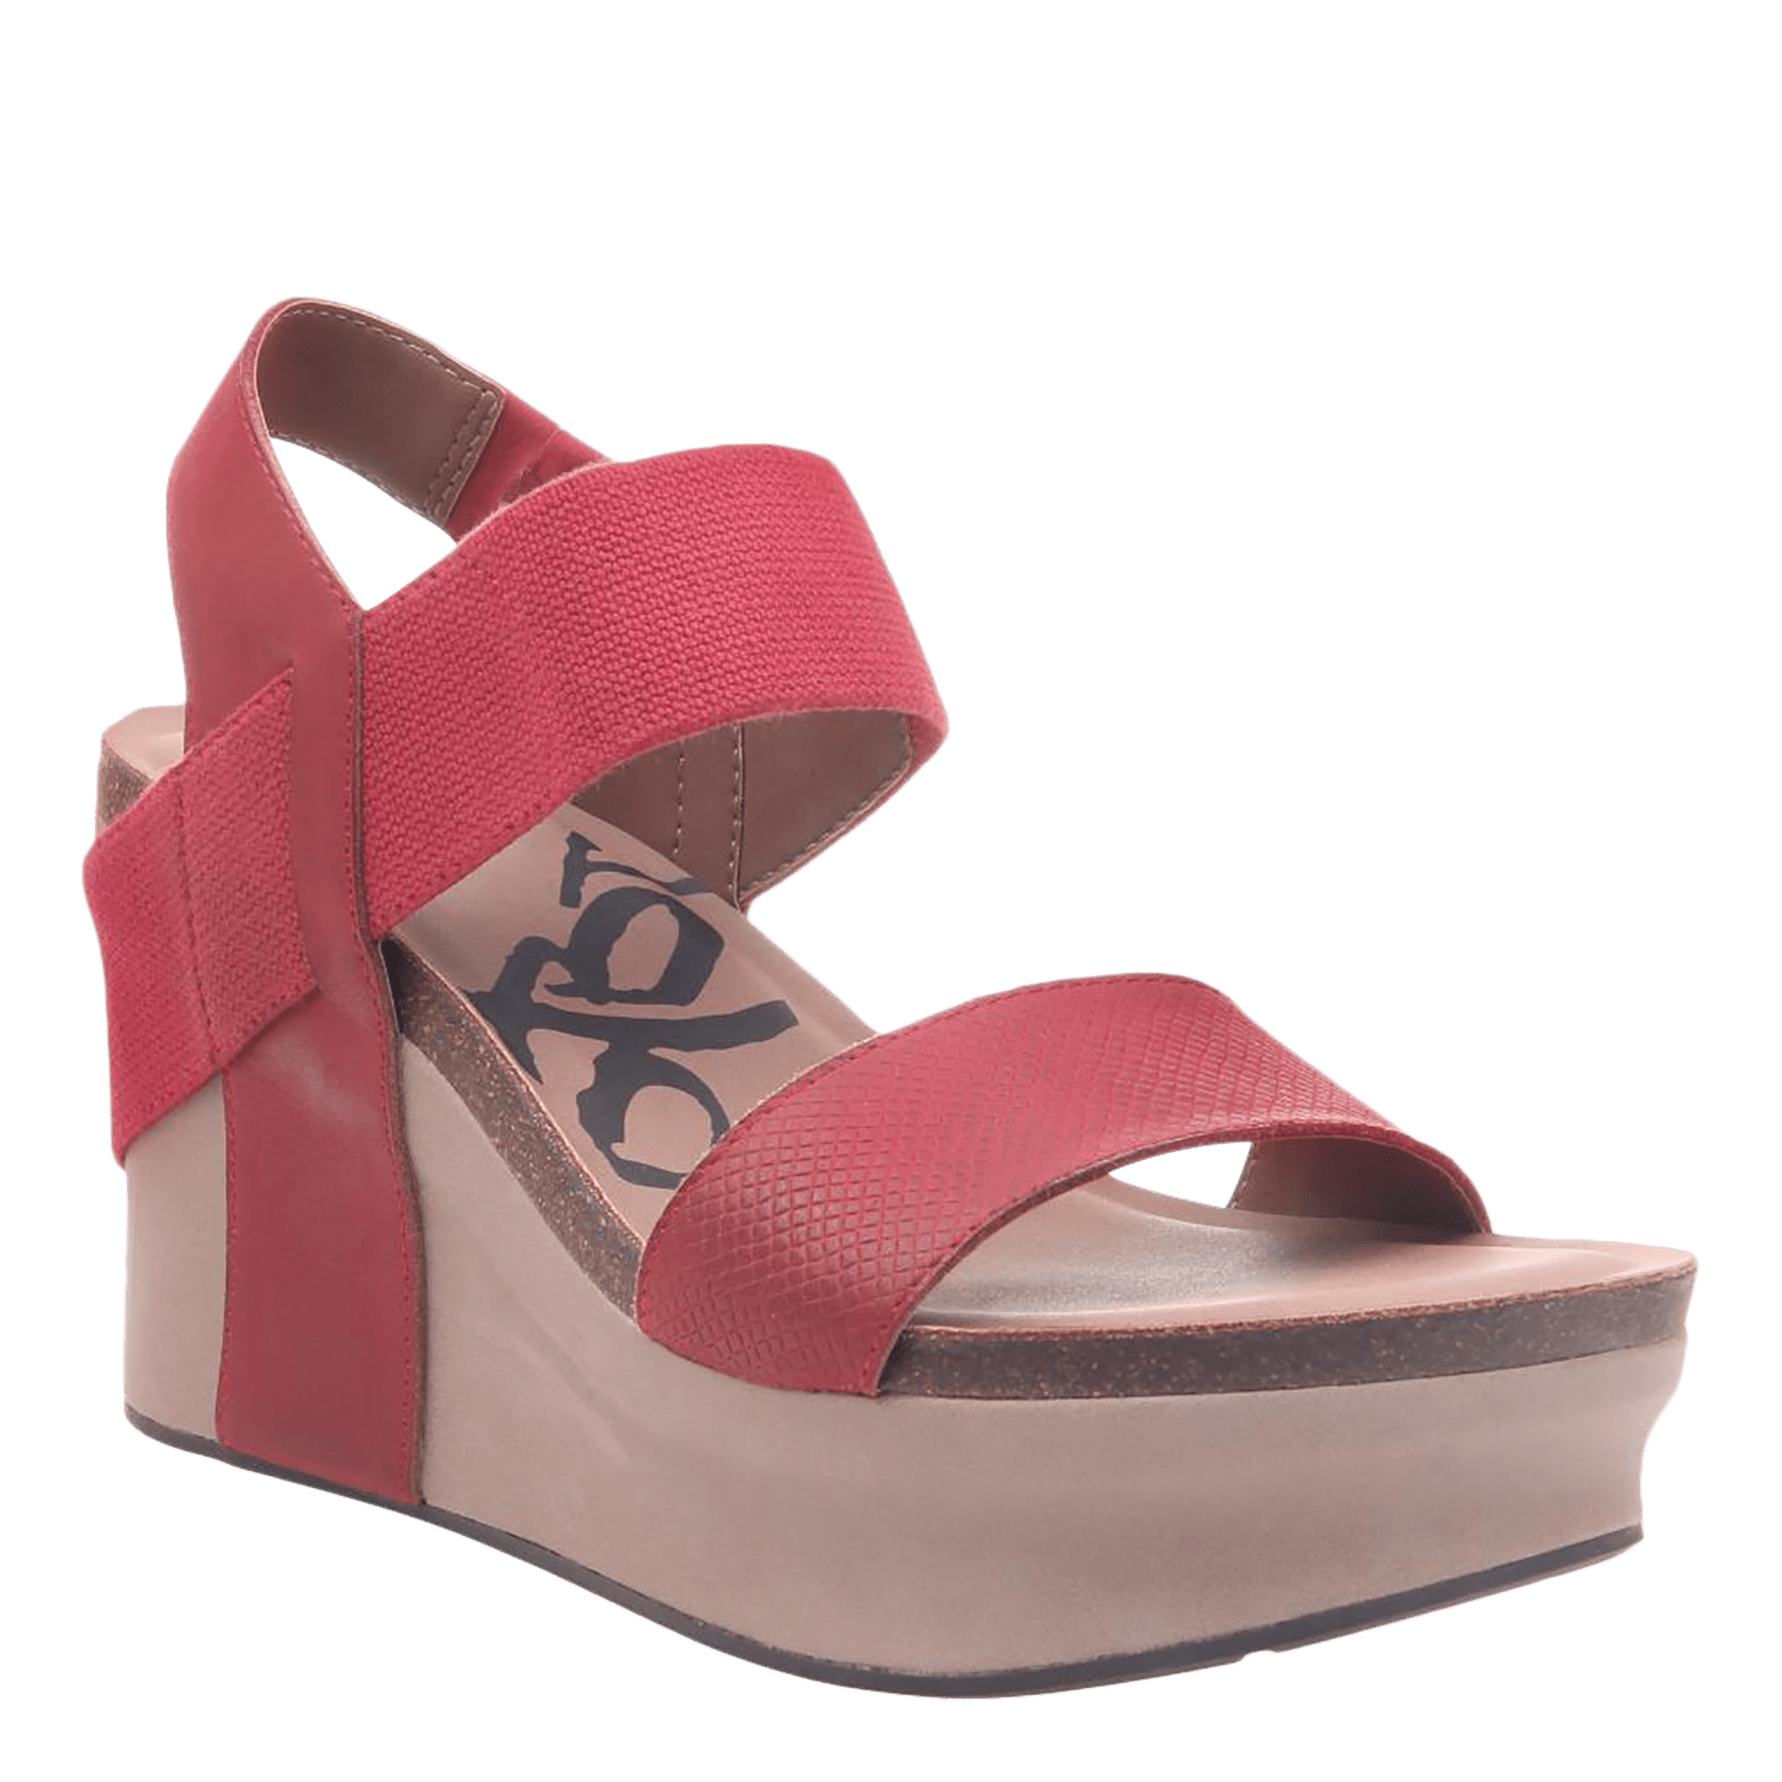 red wedge shoes